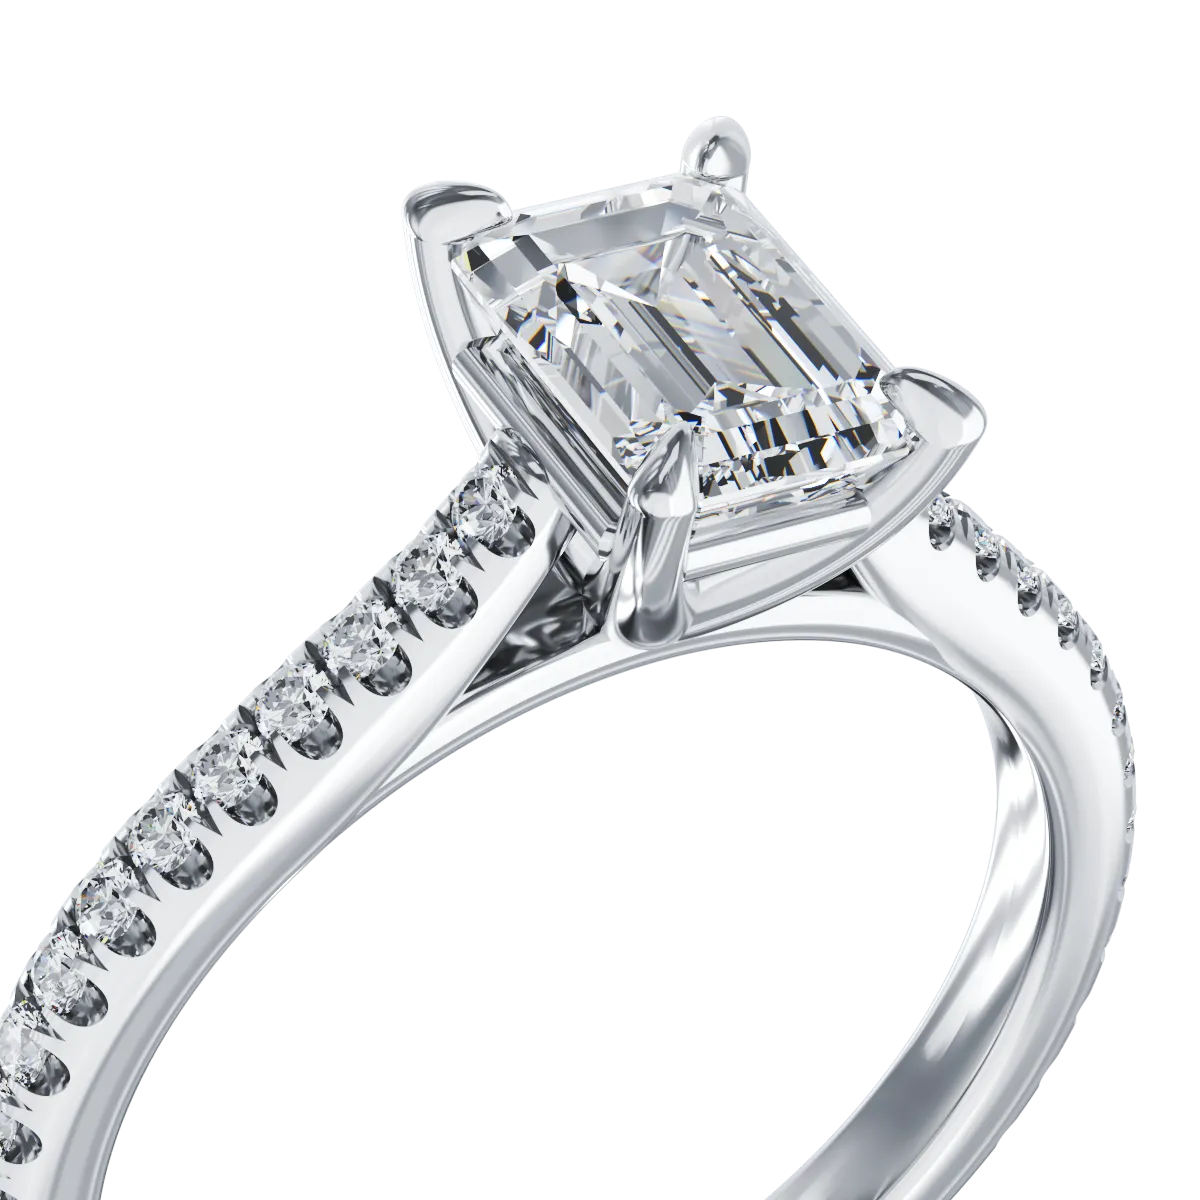 18K white gold engagement ring with 1ct diamond and 0.222ct diamonds